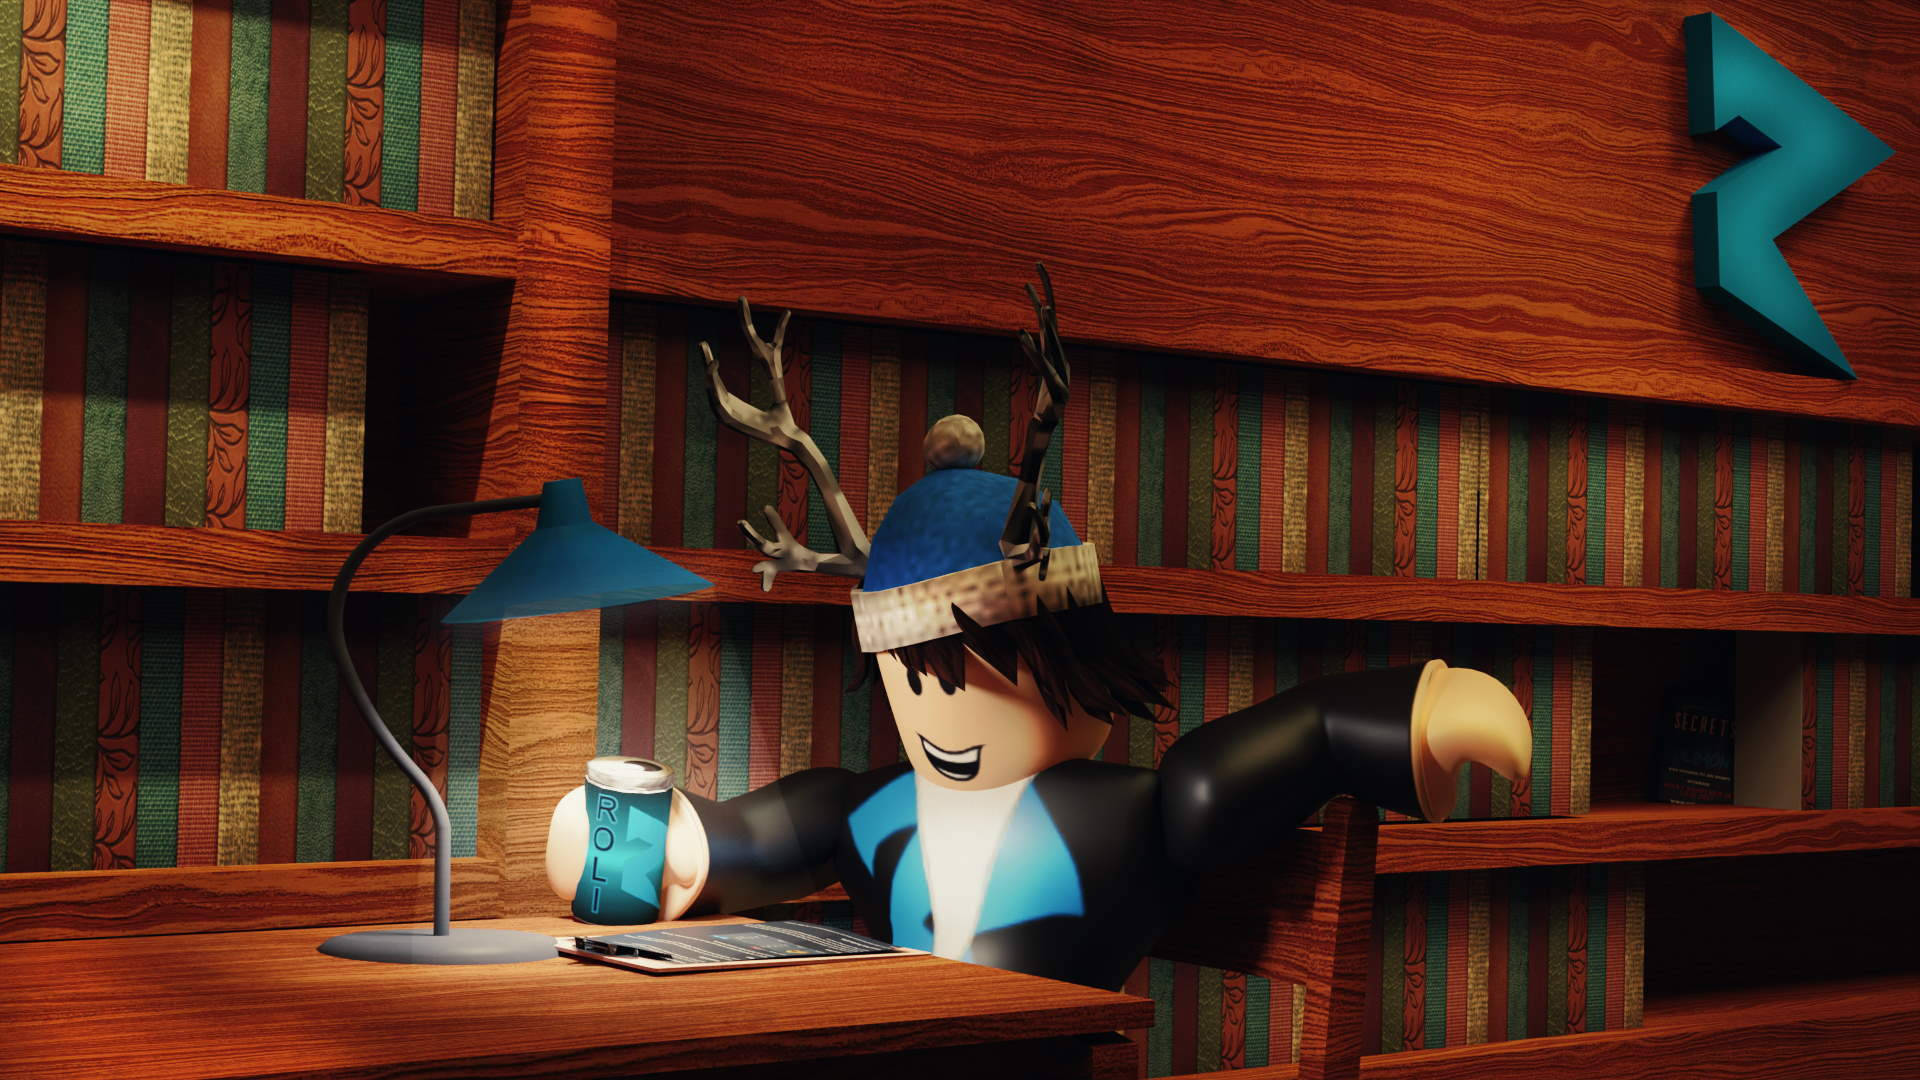 Download Roblox Avatar In Library Wallpaper 